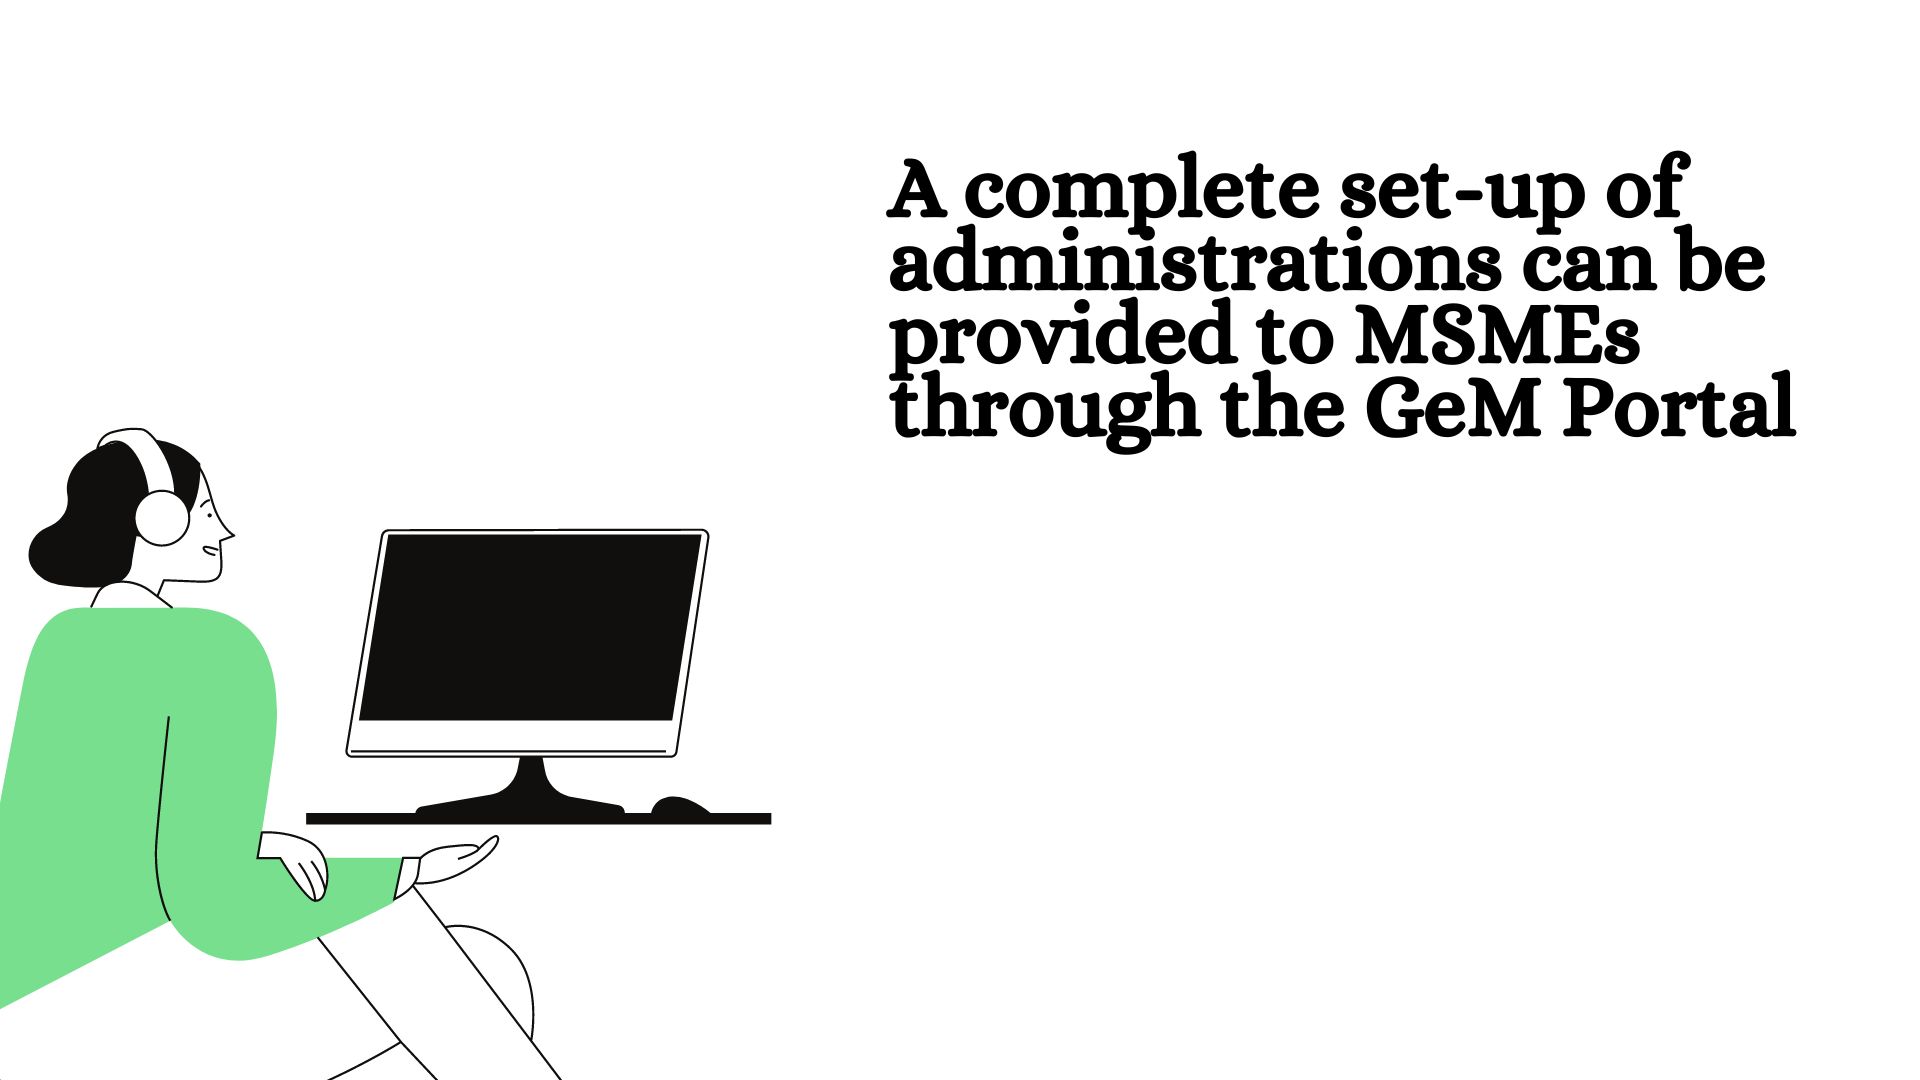 A complete set-up of administrations can be provided to MSMEs through the GeM Portal